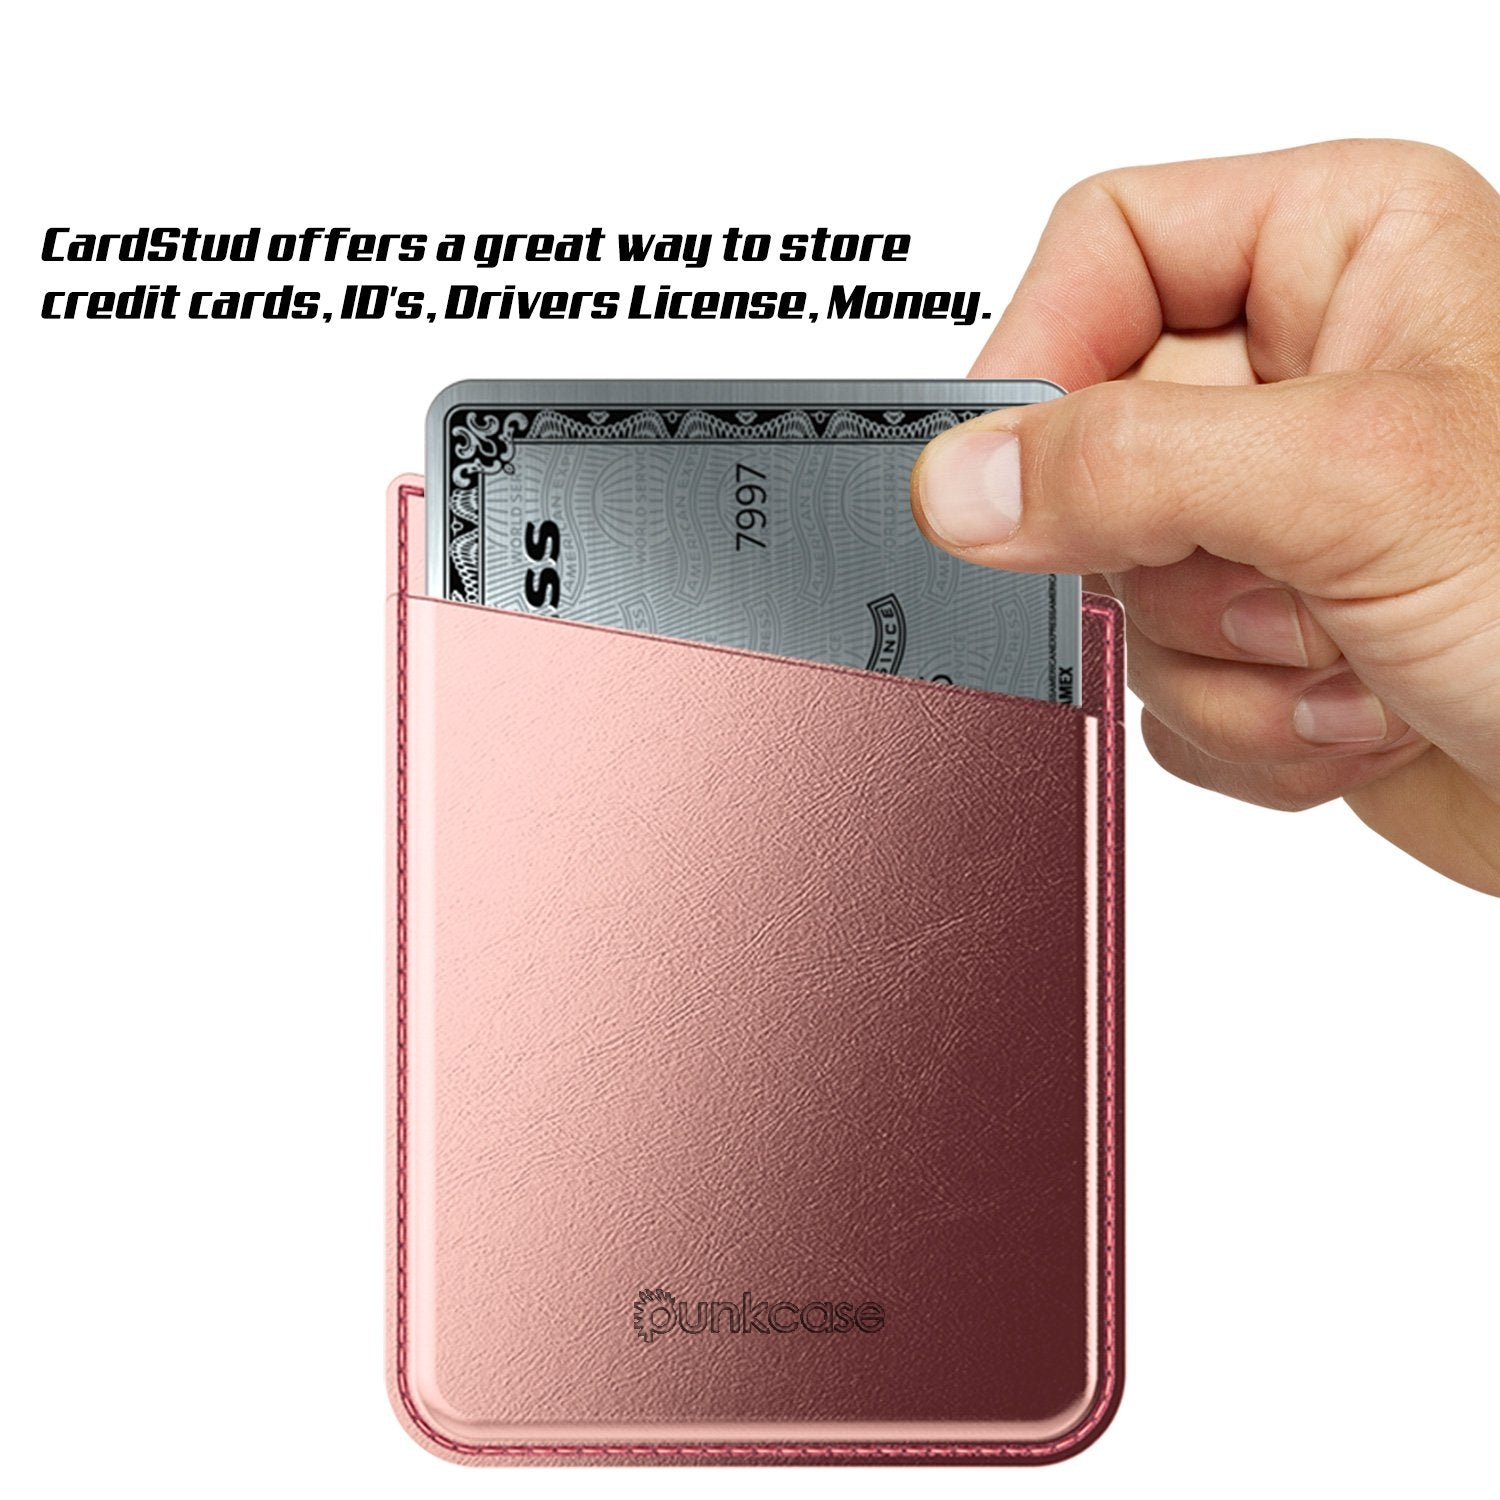 PunkCase CardStud Deluxe Stick On Wallet | Adhesive Card Holder Attachment for Back of iPhone, Android & More | Leather Pouch | [RoseGold]